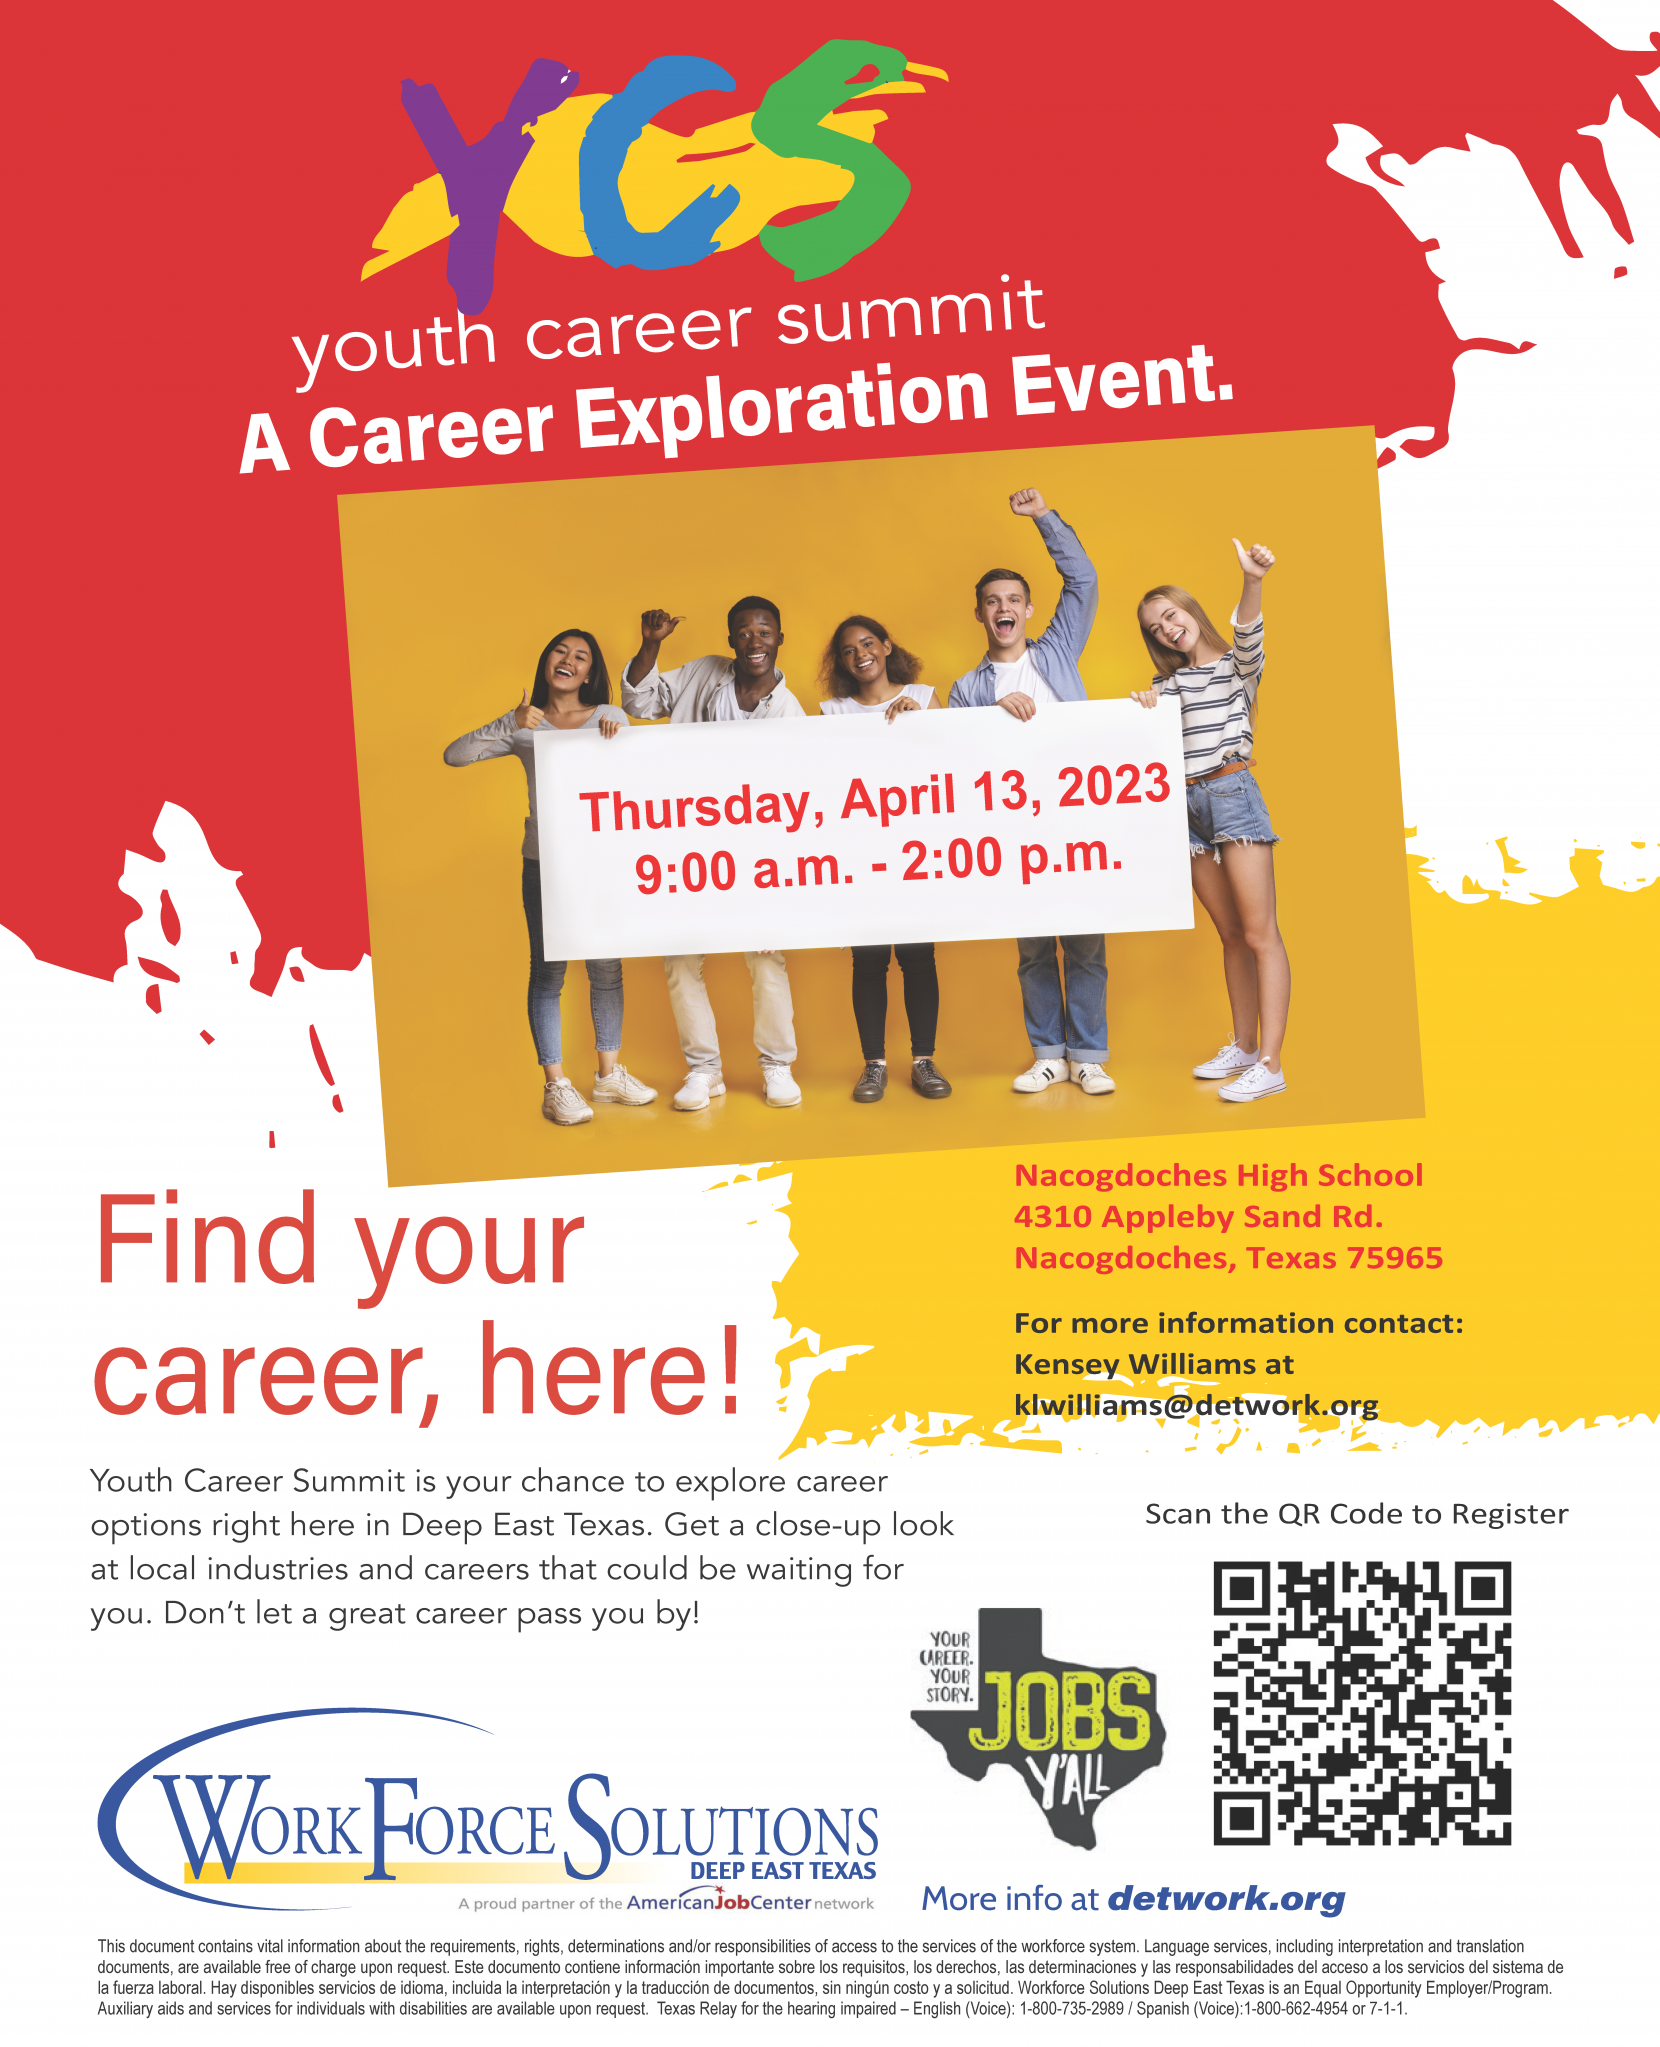 Youth Career Exploration at Nacogdoches High School April 13 2023